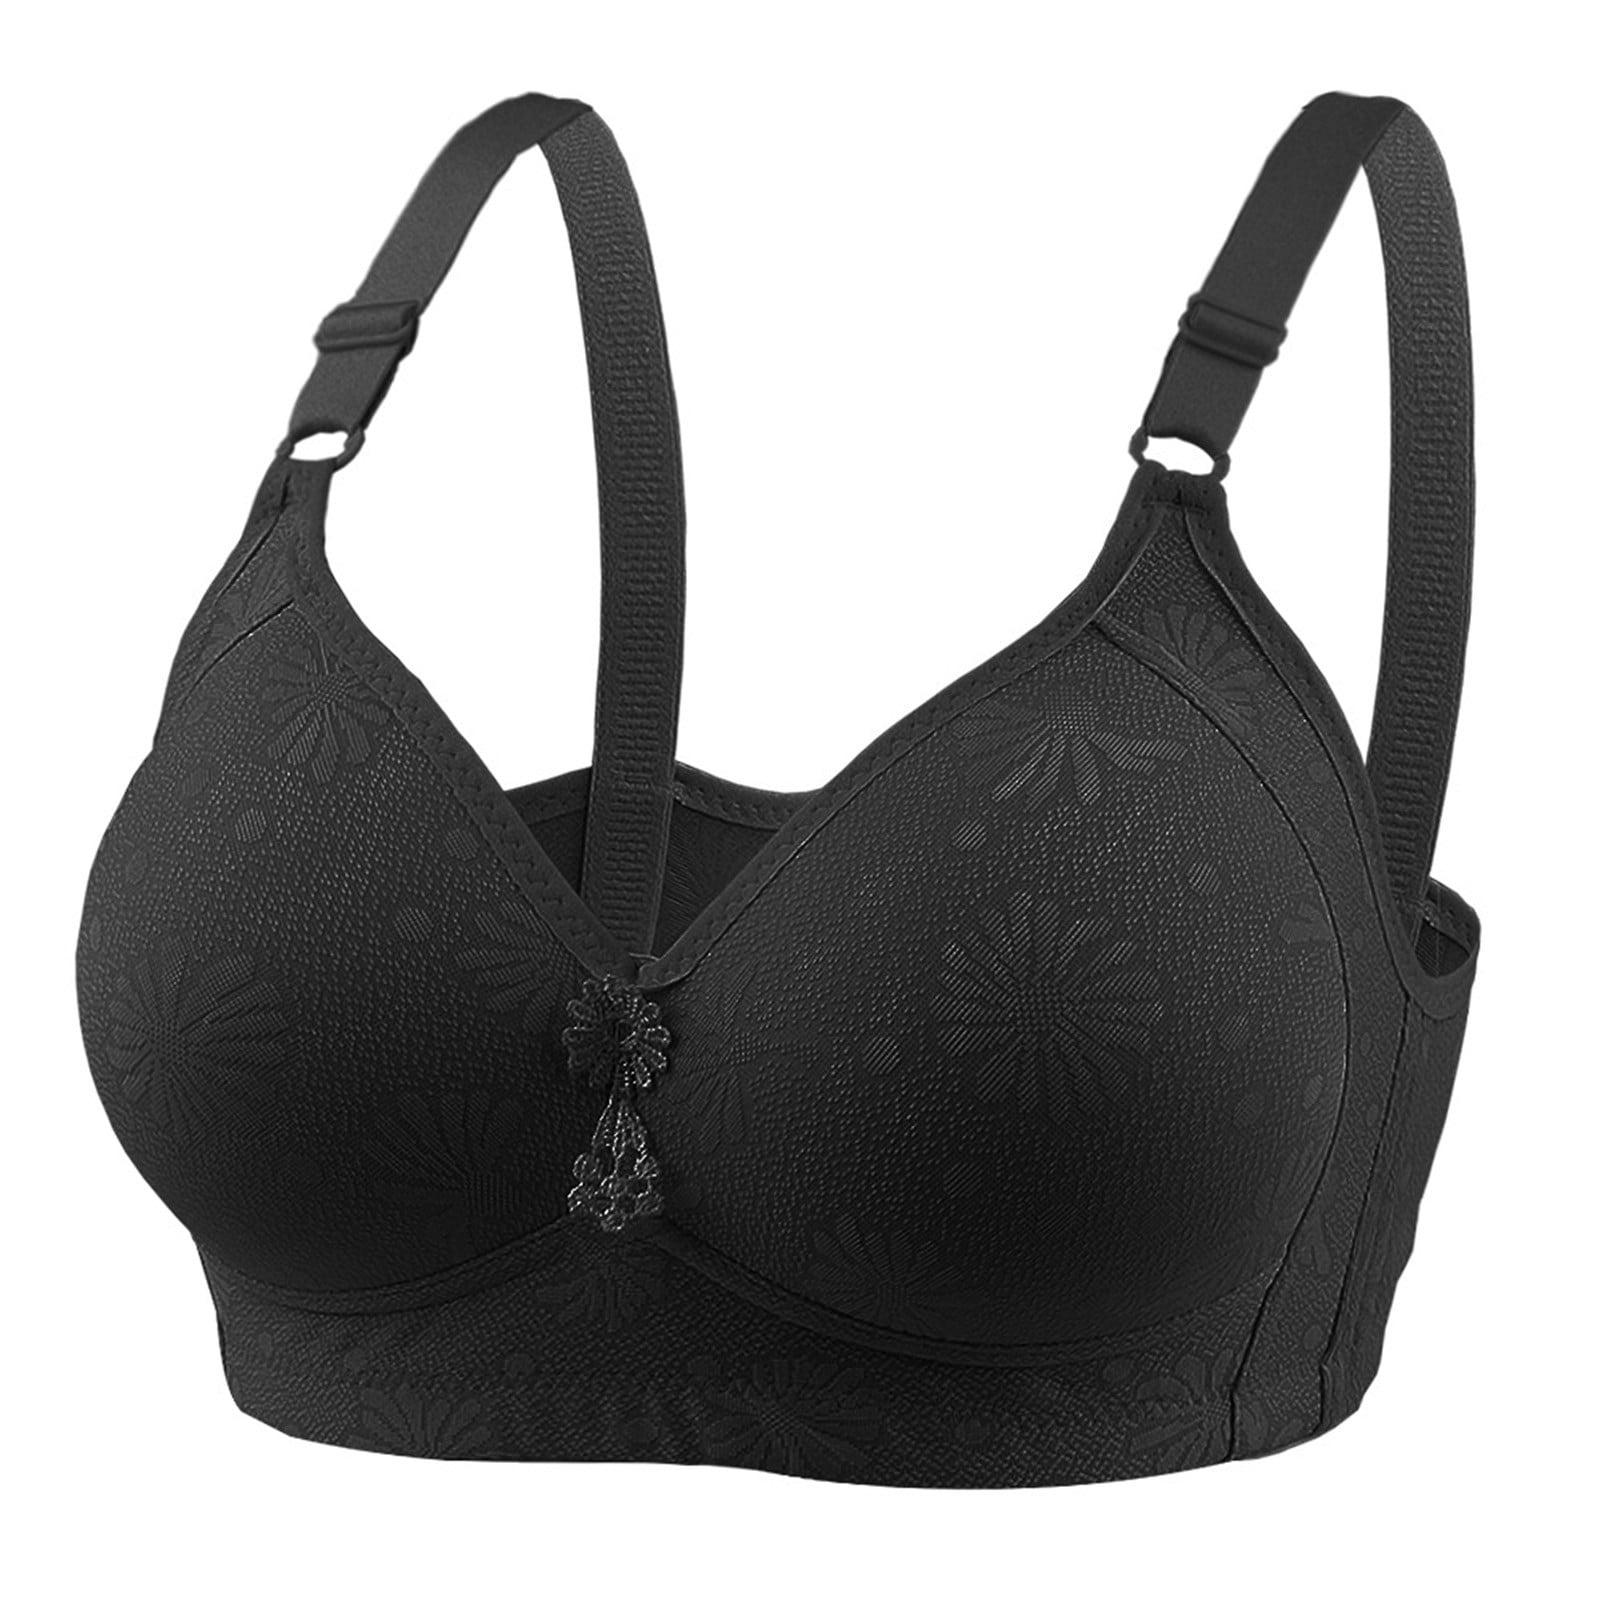 RYRJJ Women's Full-Coverage Unpadded Bras Lace Floral Full Cup